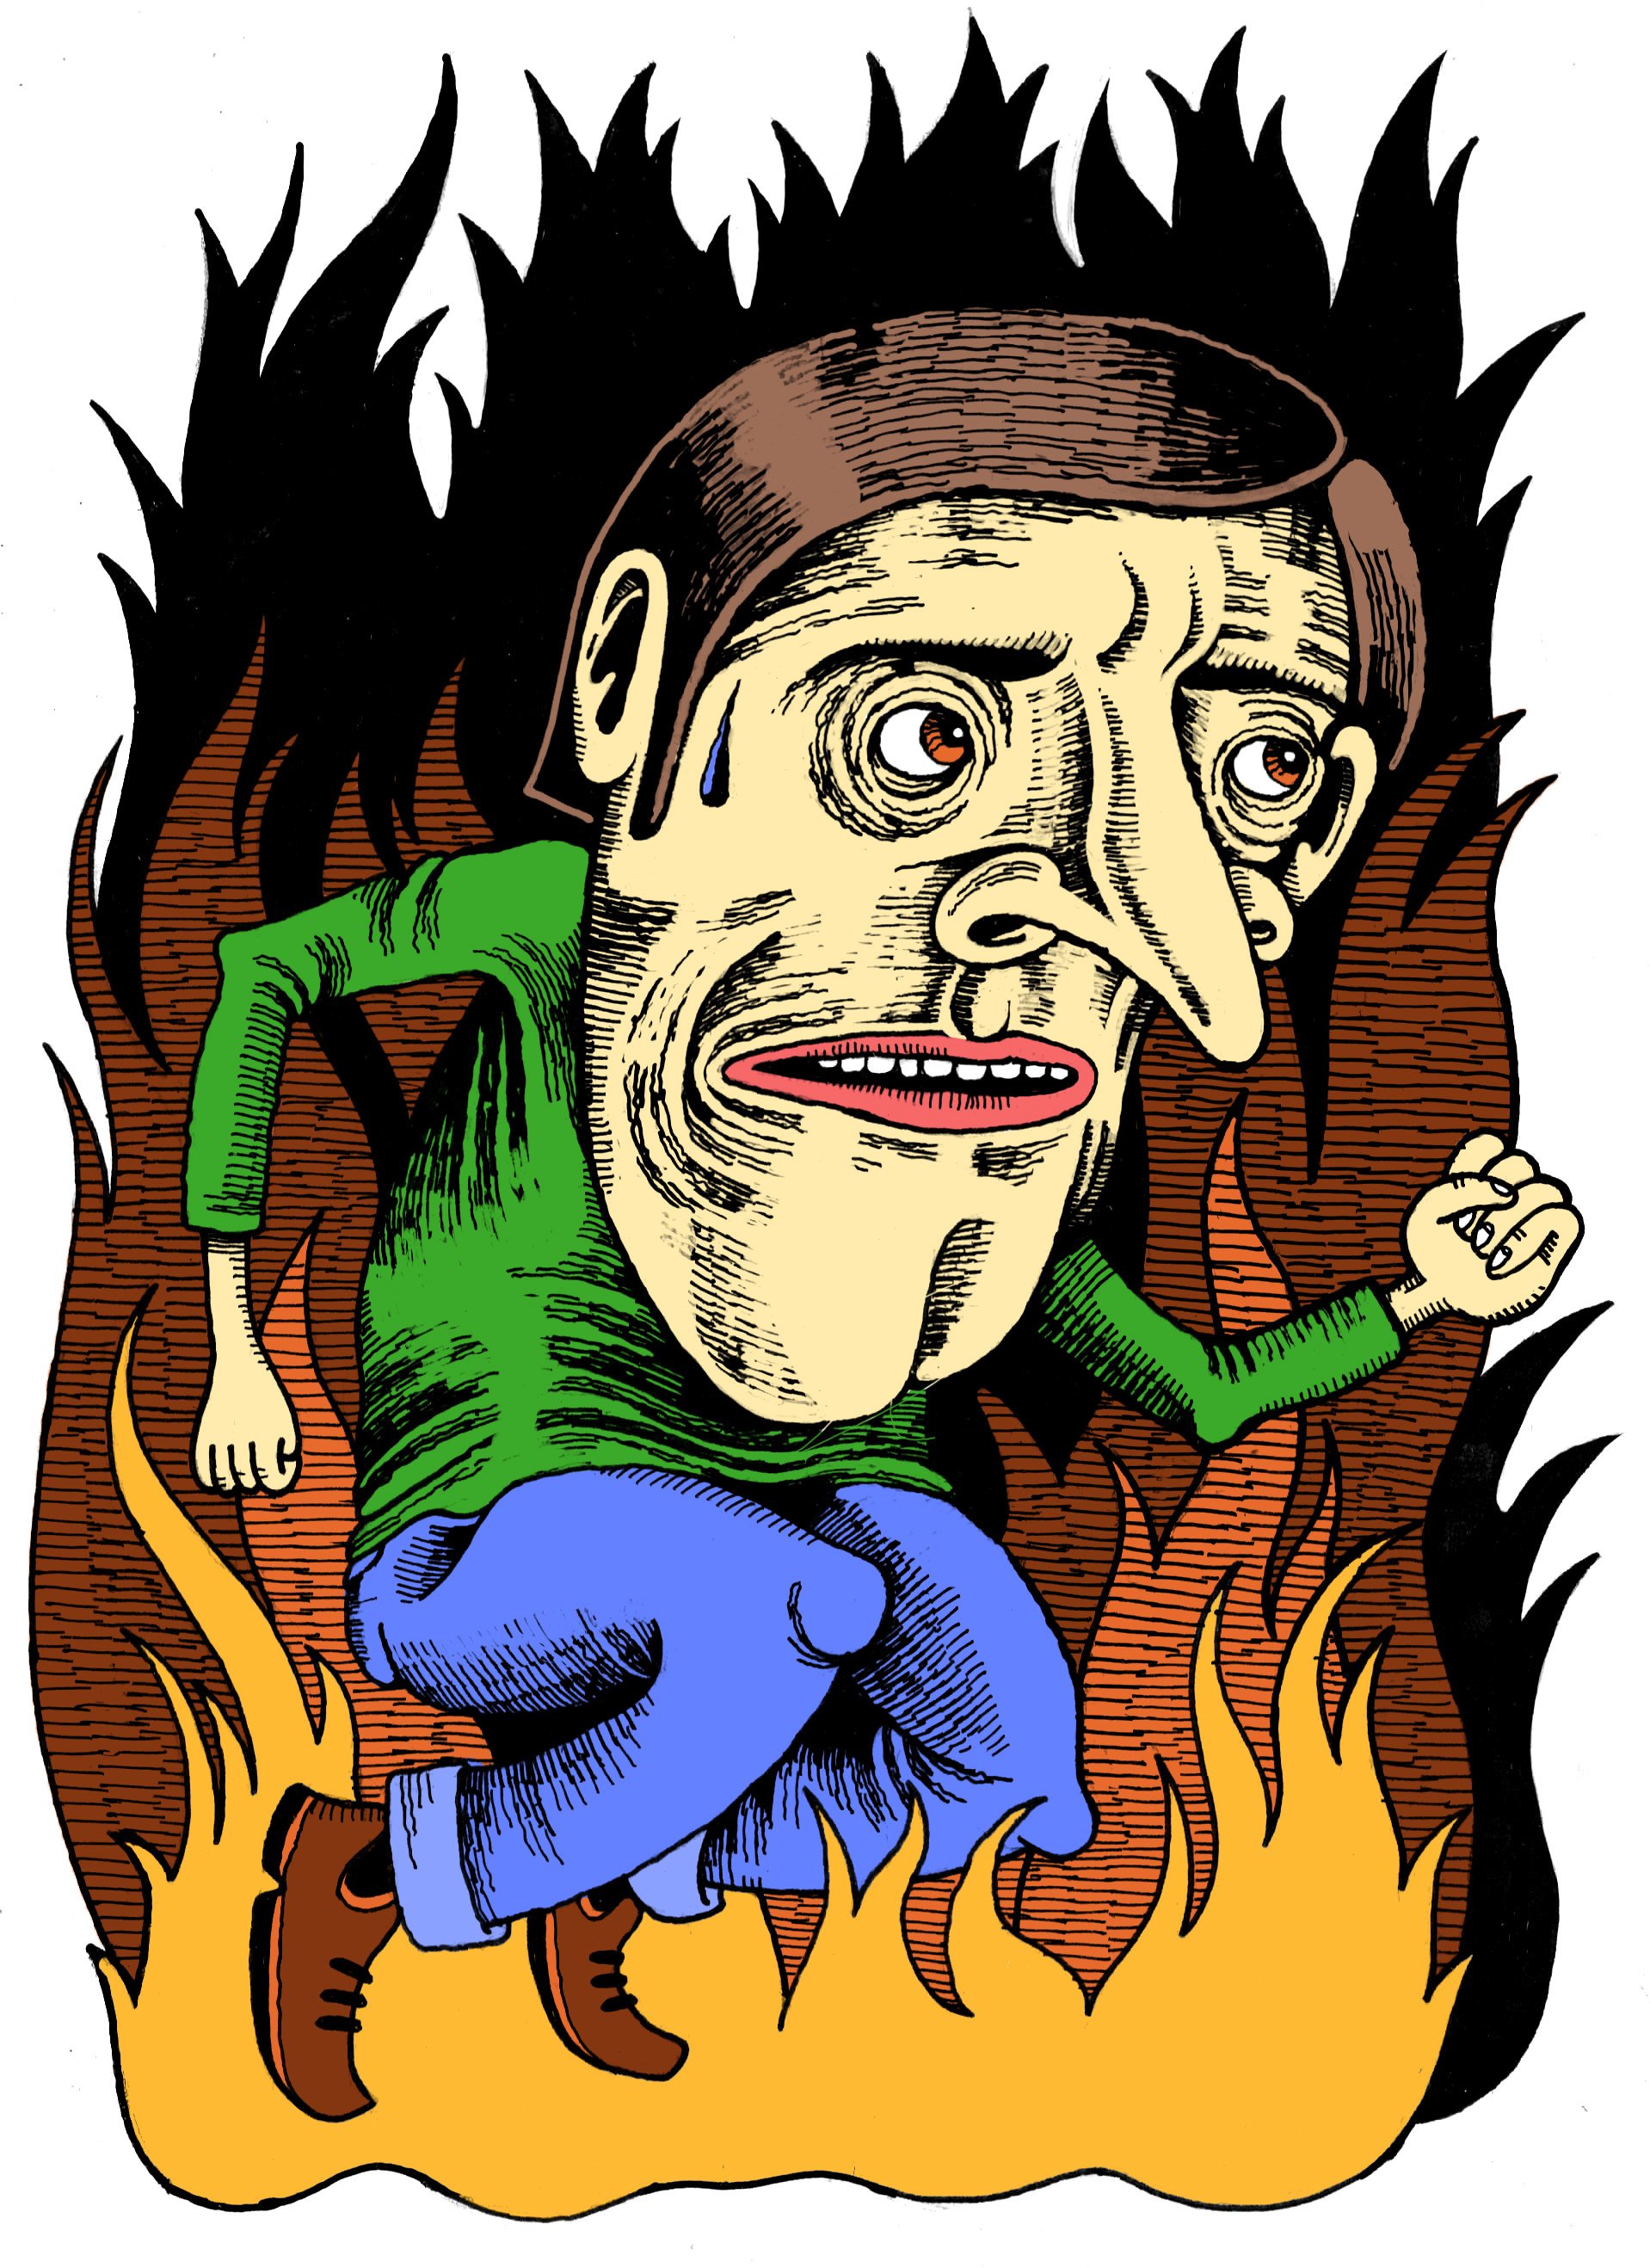 Illustration of a person standing in flames